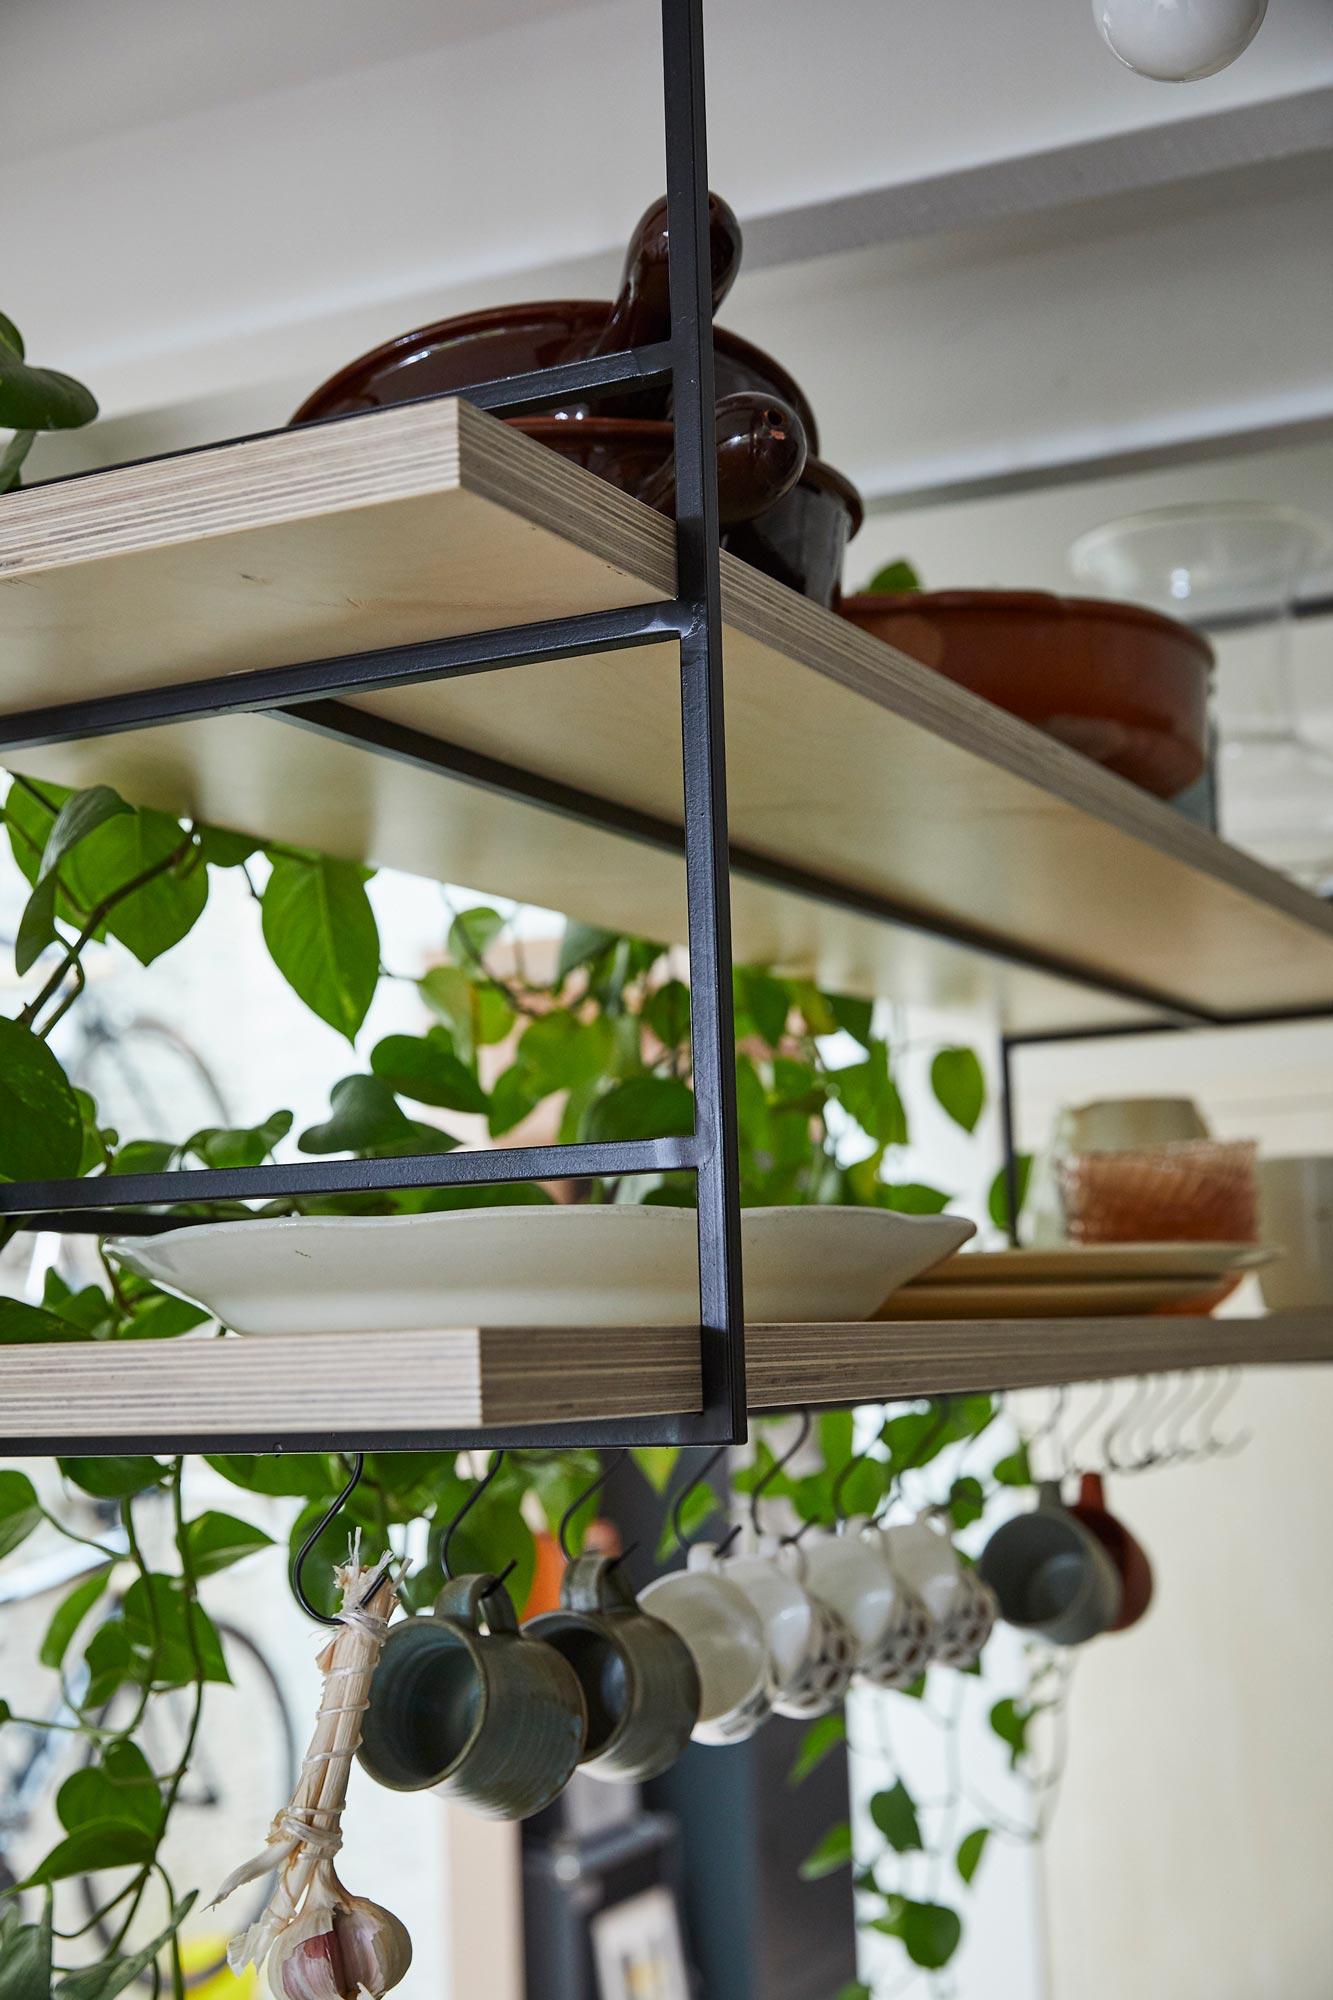 Open shelves made from birch plywood with plants and plates stacked on